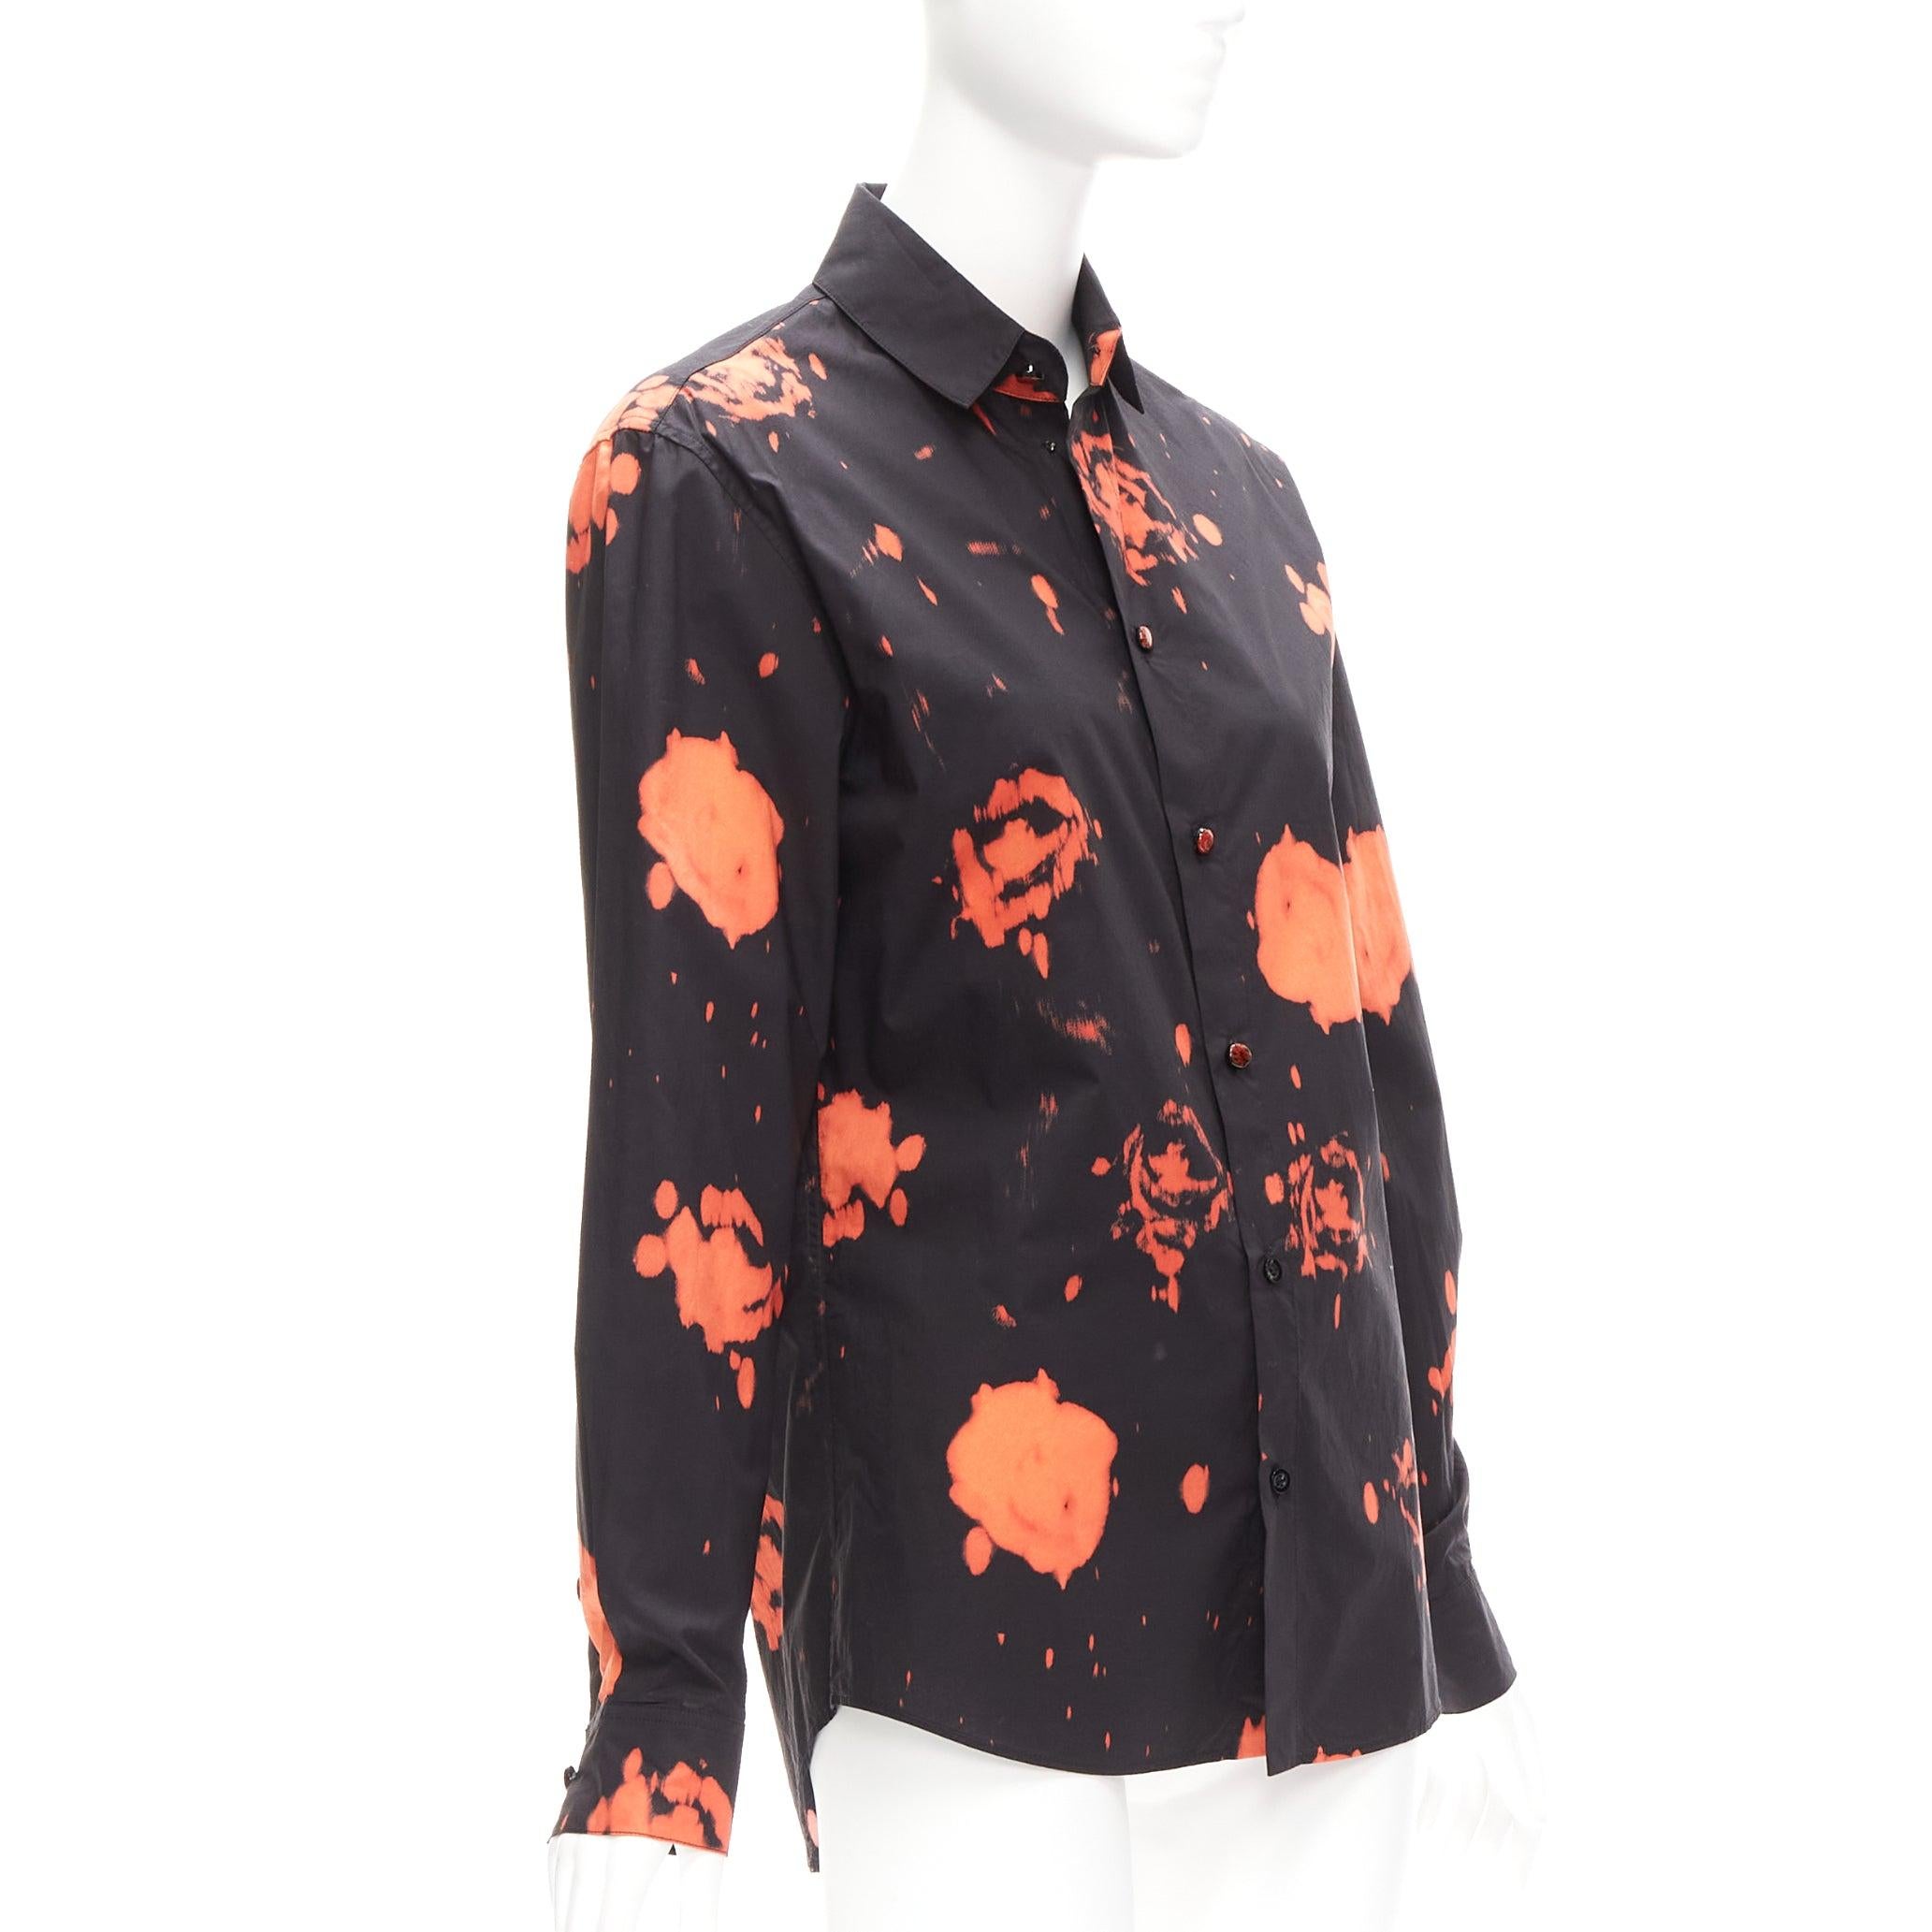 MARNI red black splatter tie dye rose print cotton button-up shirt IT38 XS
Reference: CELG/A00354
Brand: Marni
Material: Cotton
Color: Black, Red
Pattern: Tie Dye
Closure: Button
Made in: Portugal

CONDITION:
Condition: Excellent, this item was